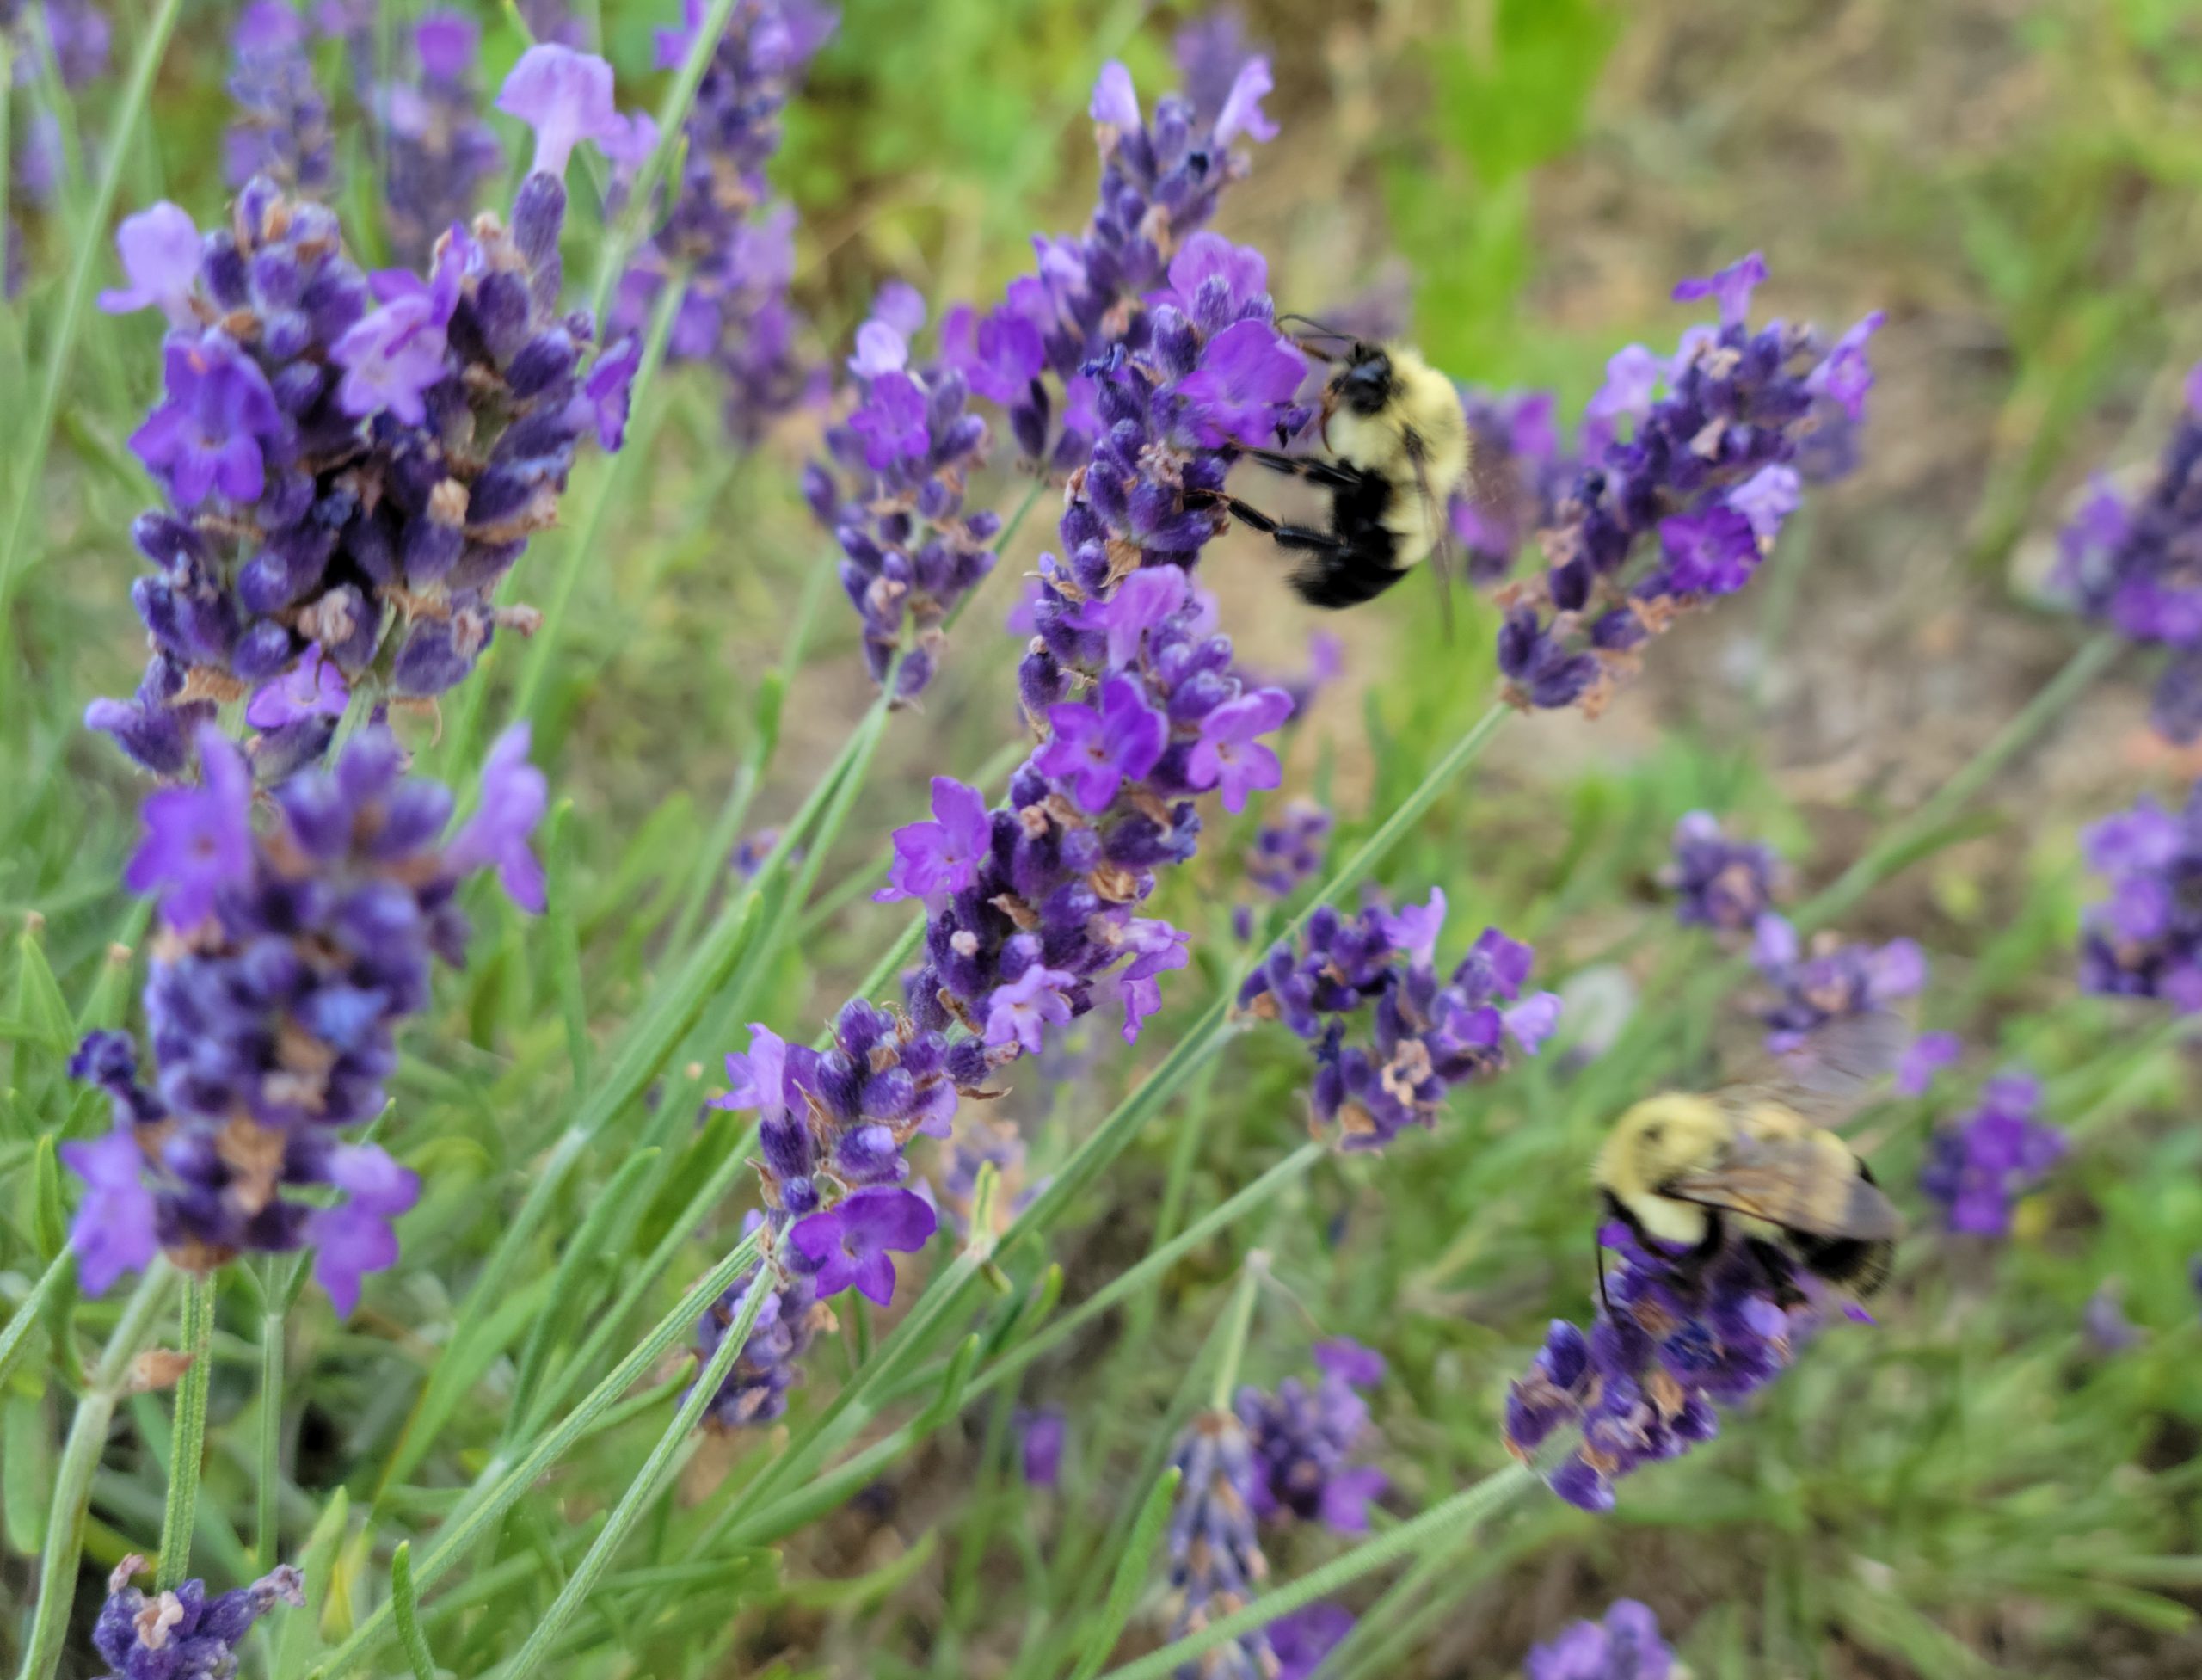 Image: Two bees on lavender stems